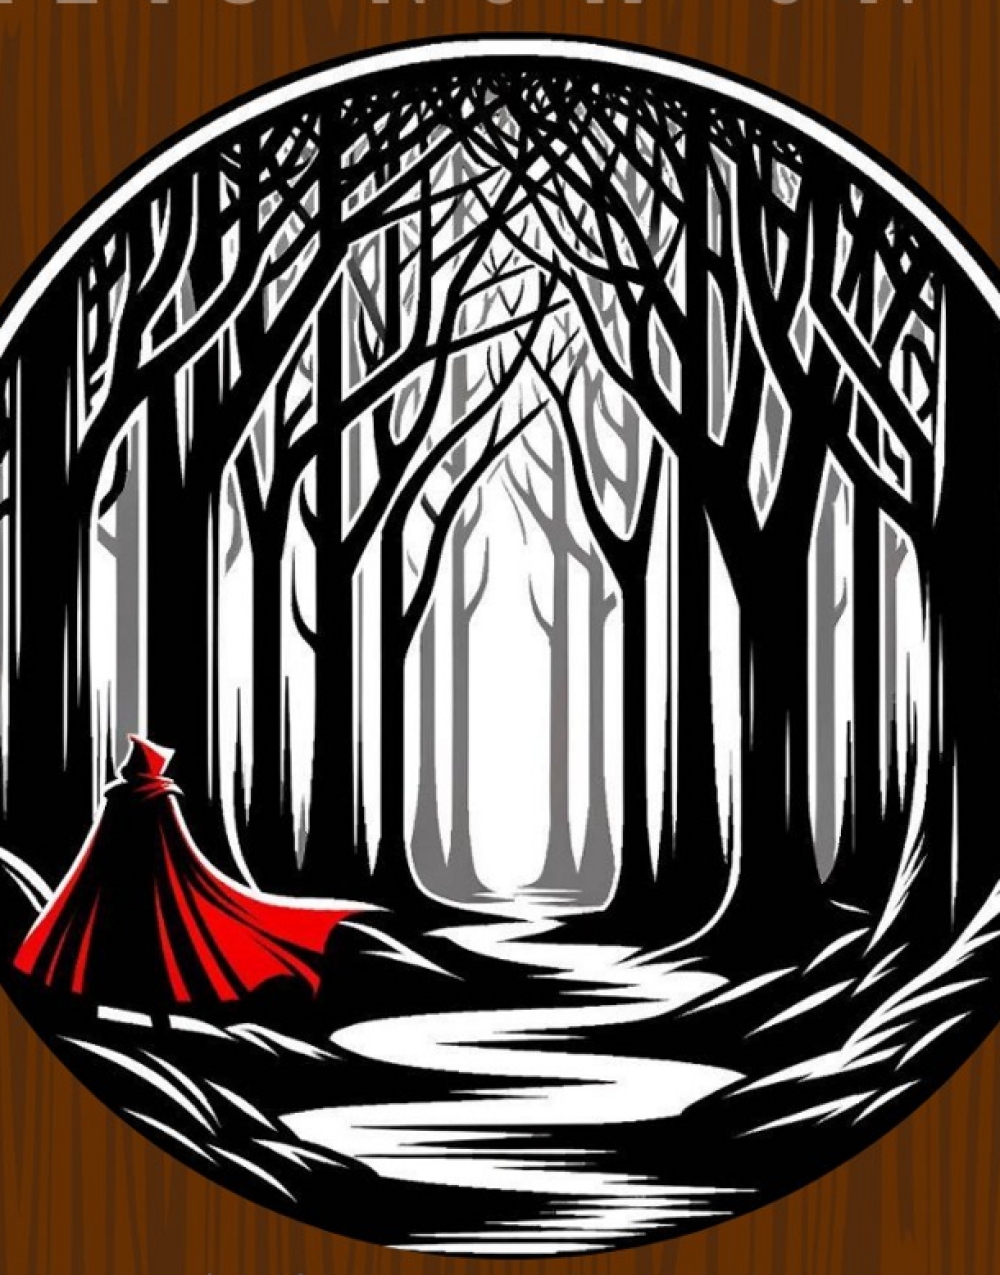 Into the Woods JR. at Center Stage Youth Theatre